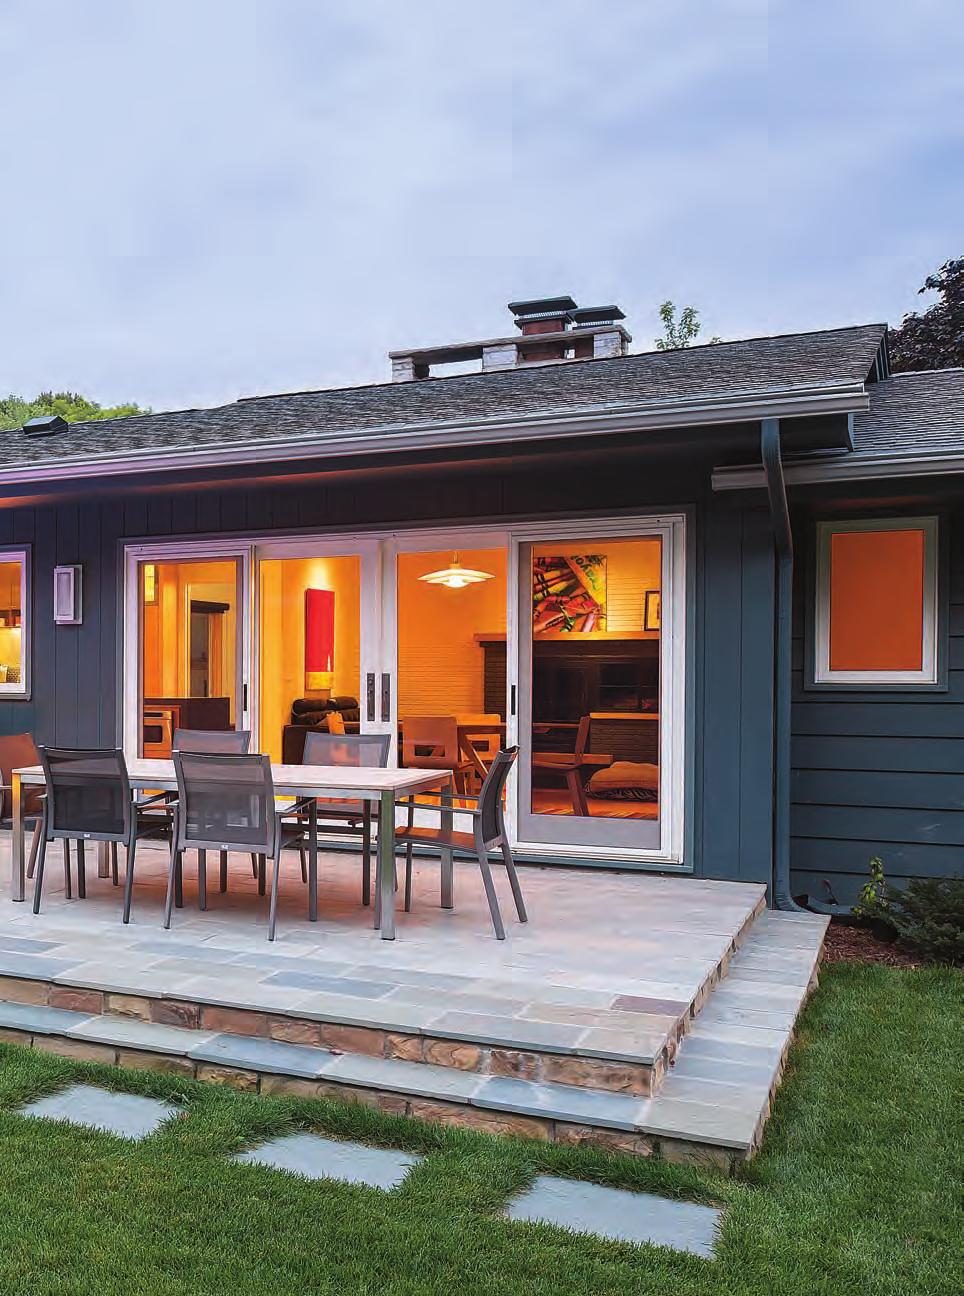 Backyard oasis Vertical fiber-cement siding, which complements the home s original redwood siding, helps the 2-ft. addition blend seamlessly into the rear elevation.